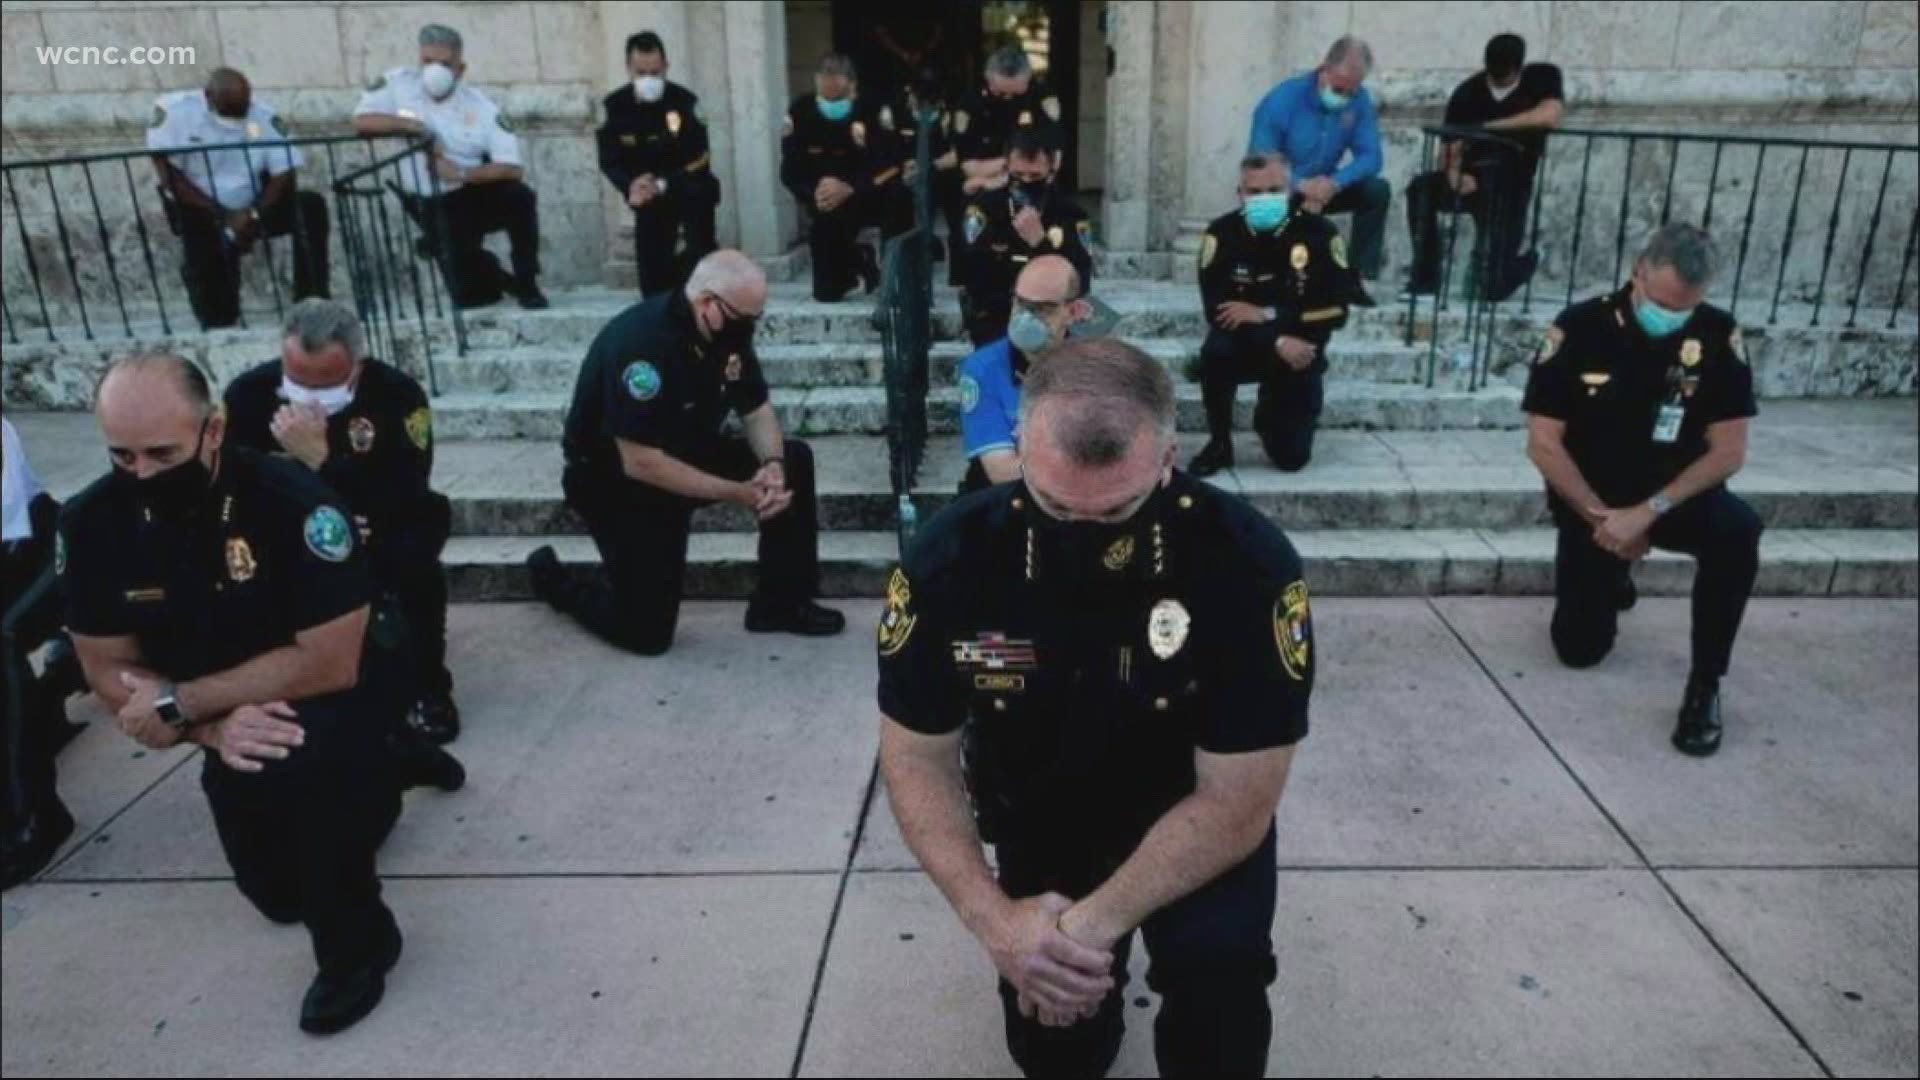 A police chief in South Carolina went viral for good reasons Monday, while officers in Miami used their platform to take a knee with protesters.